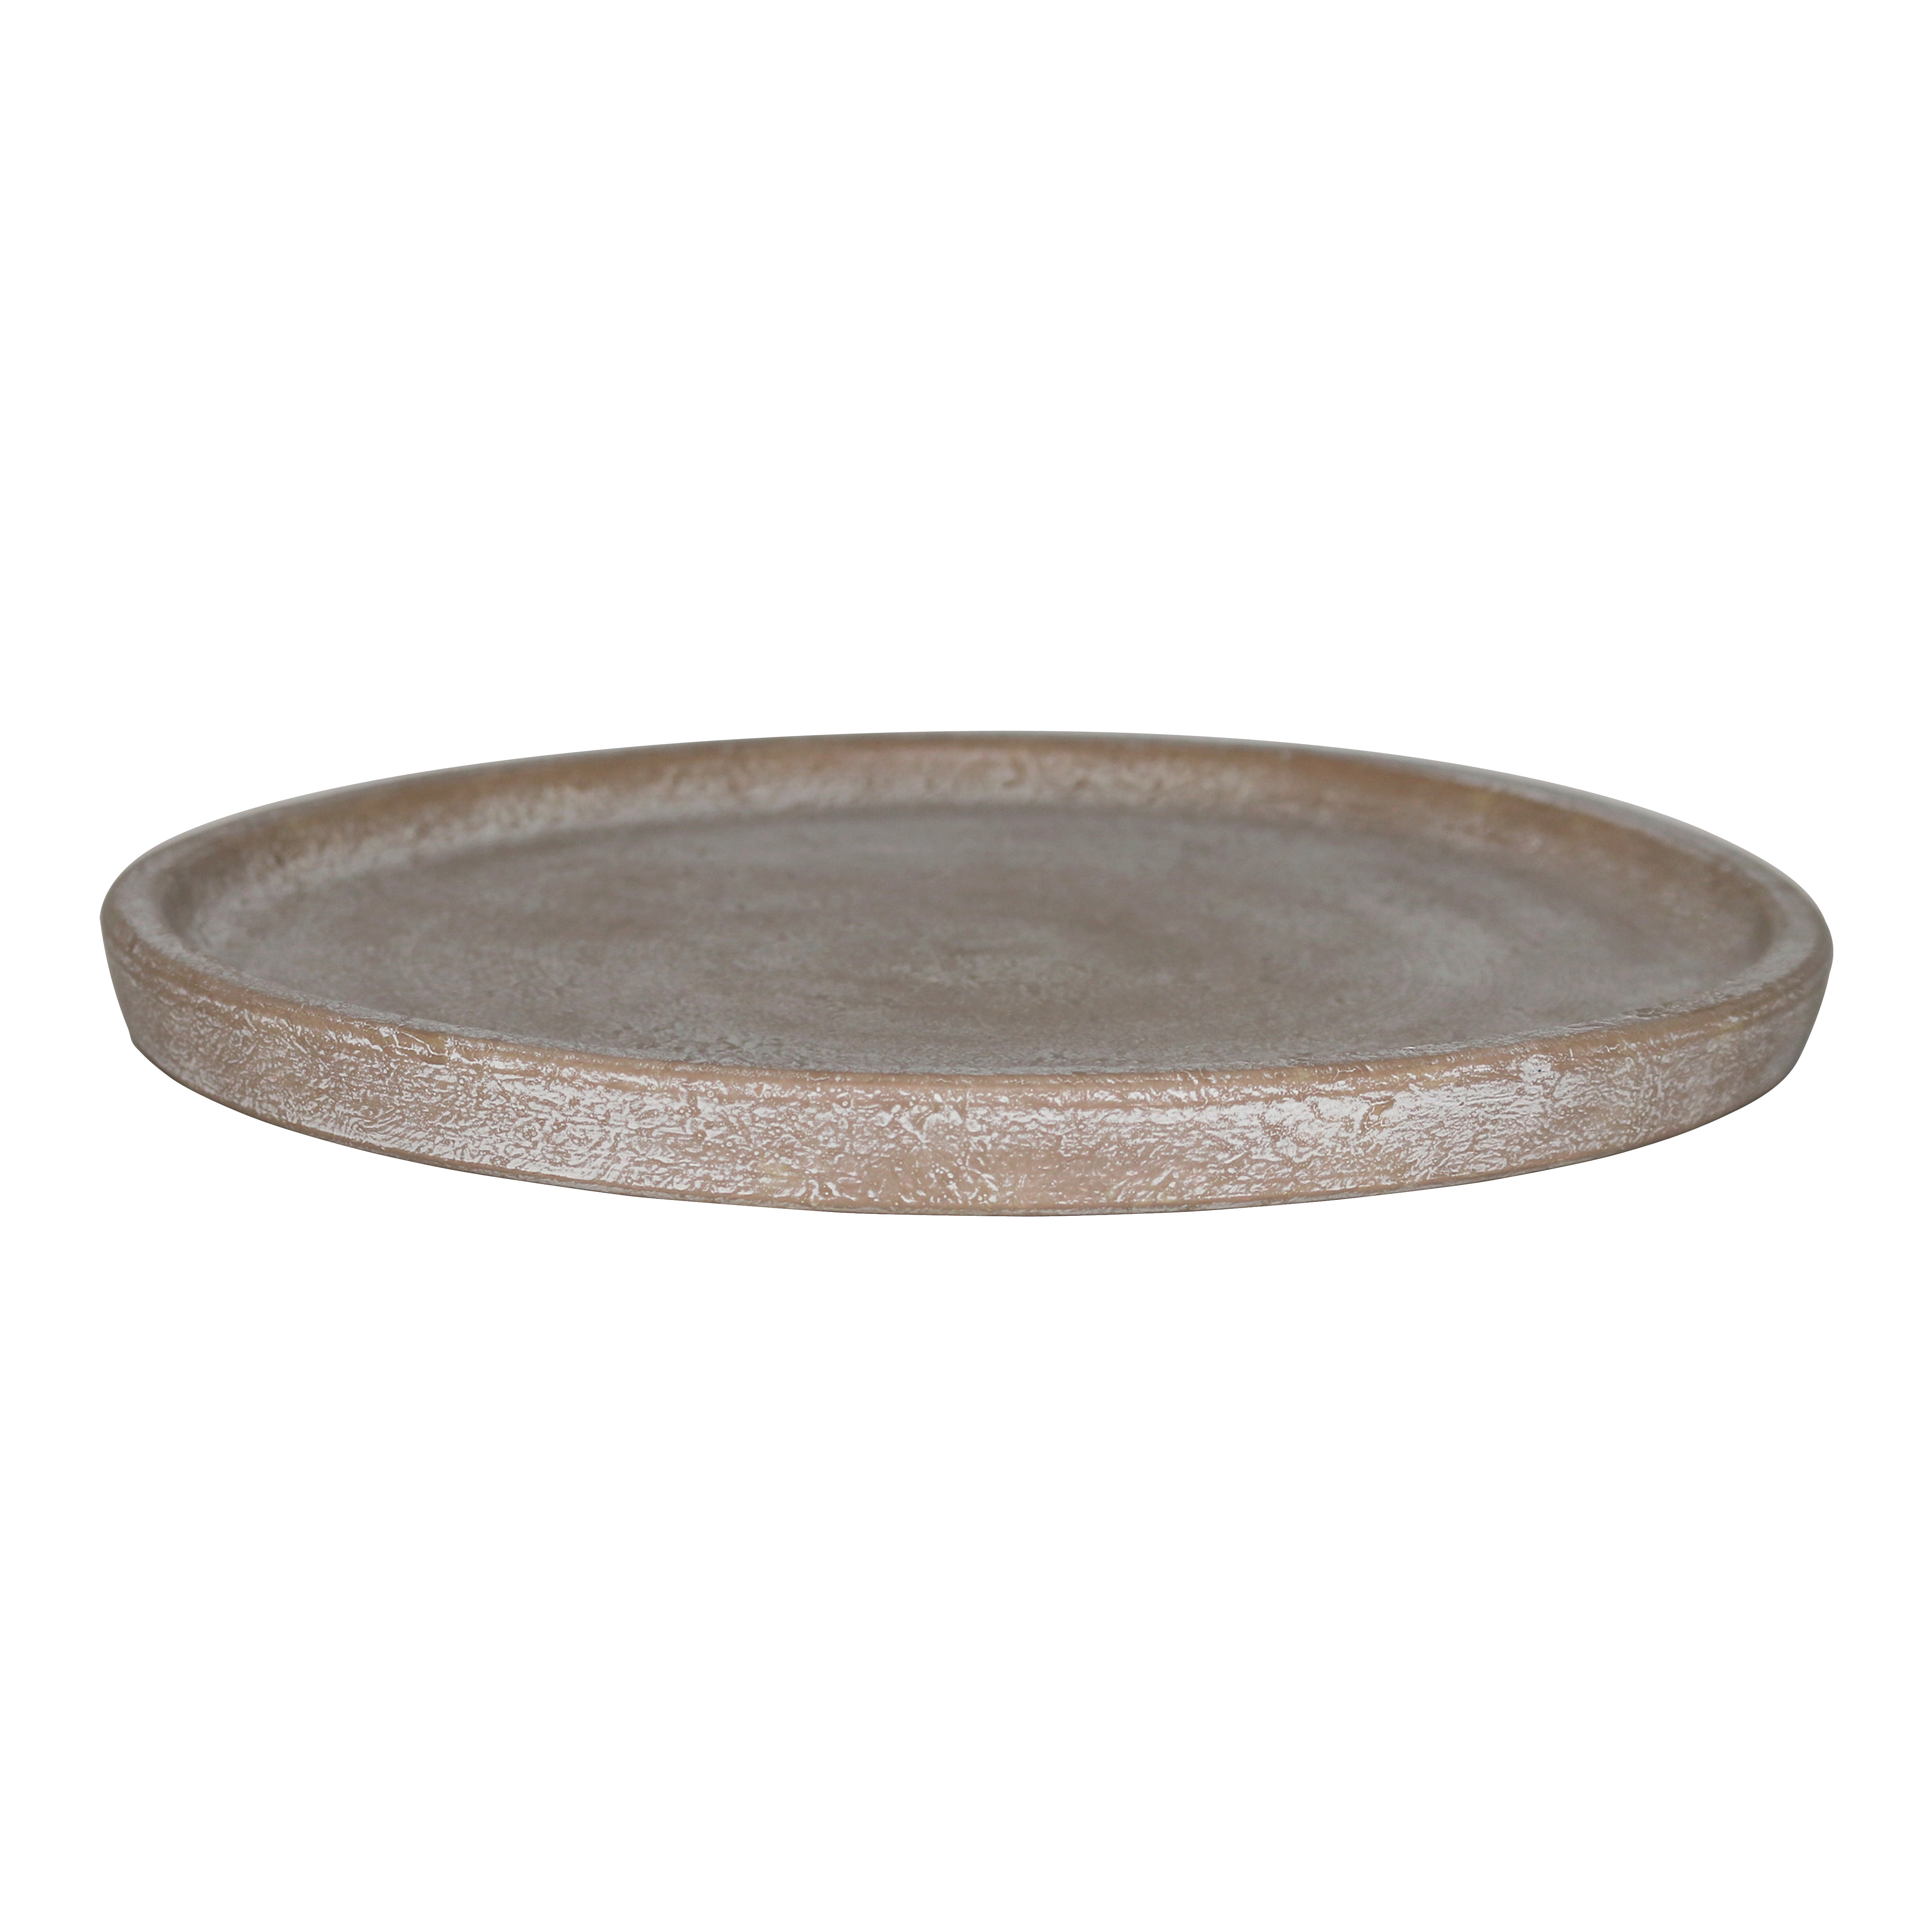 Better Homes & Gardens 10 in. Hand-painted Brown Earthenware Saucer